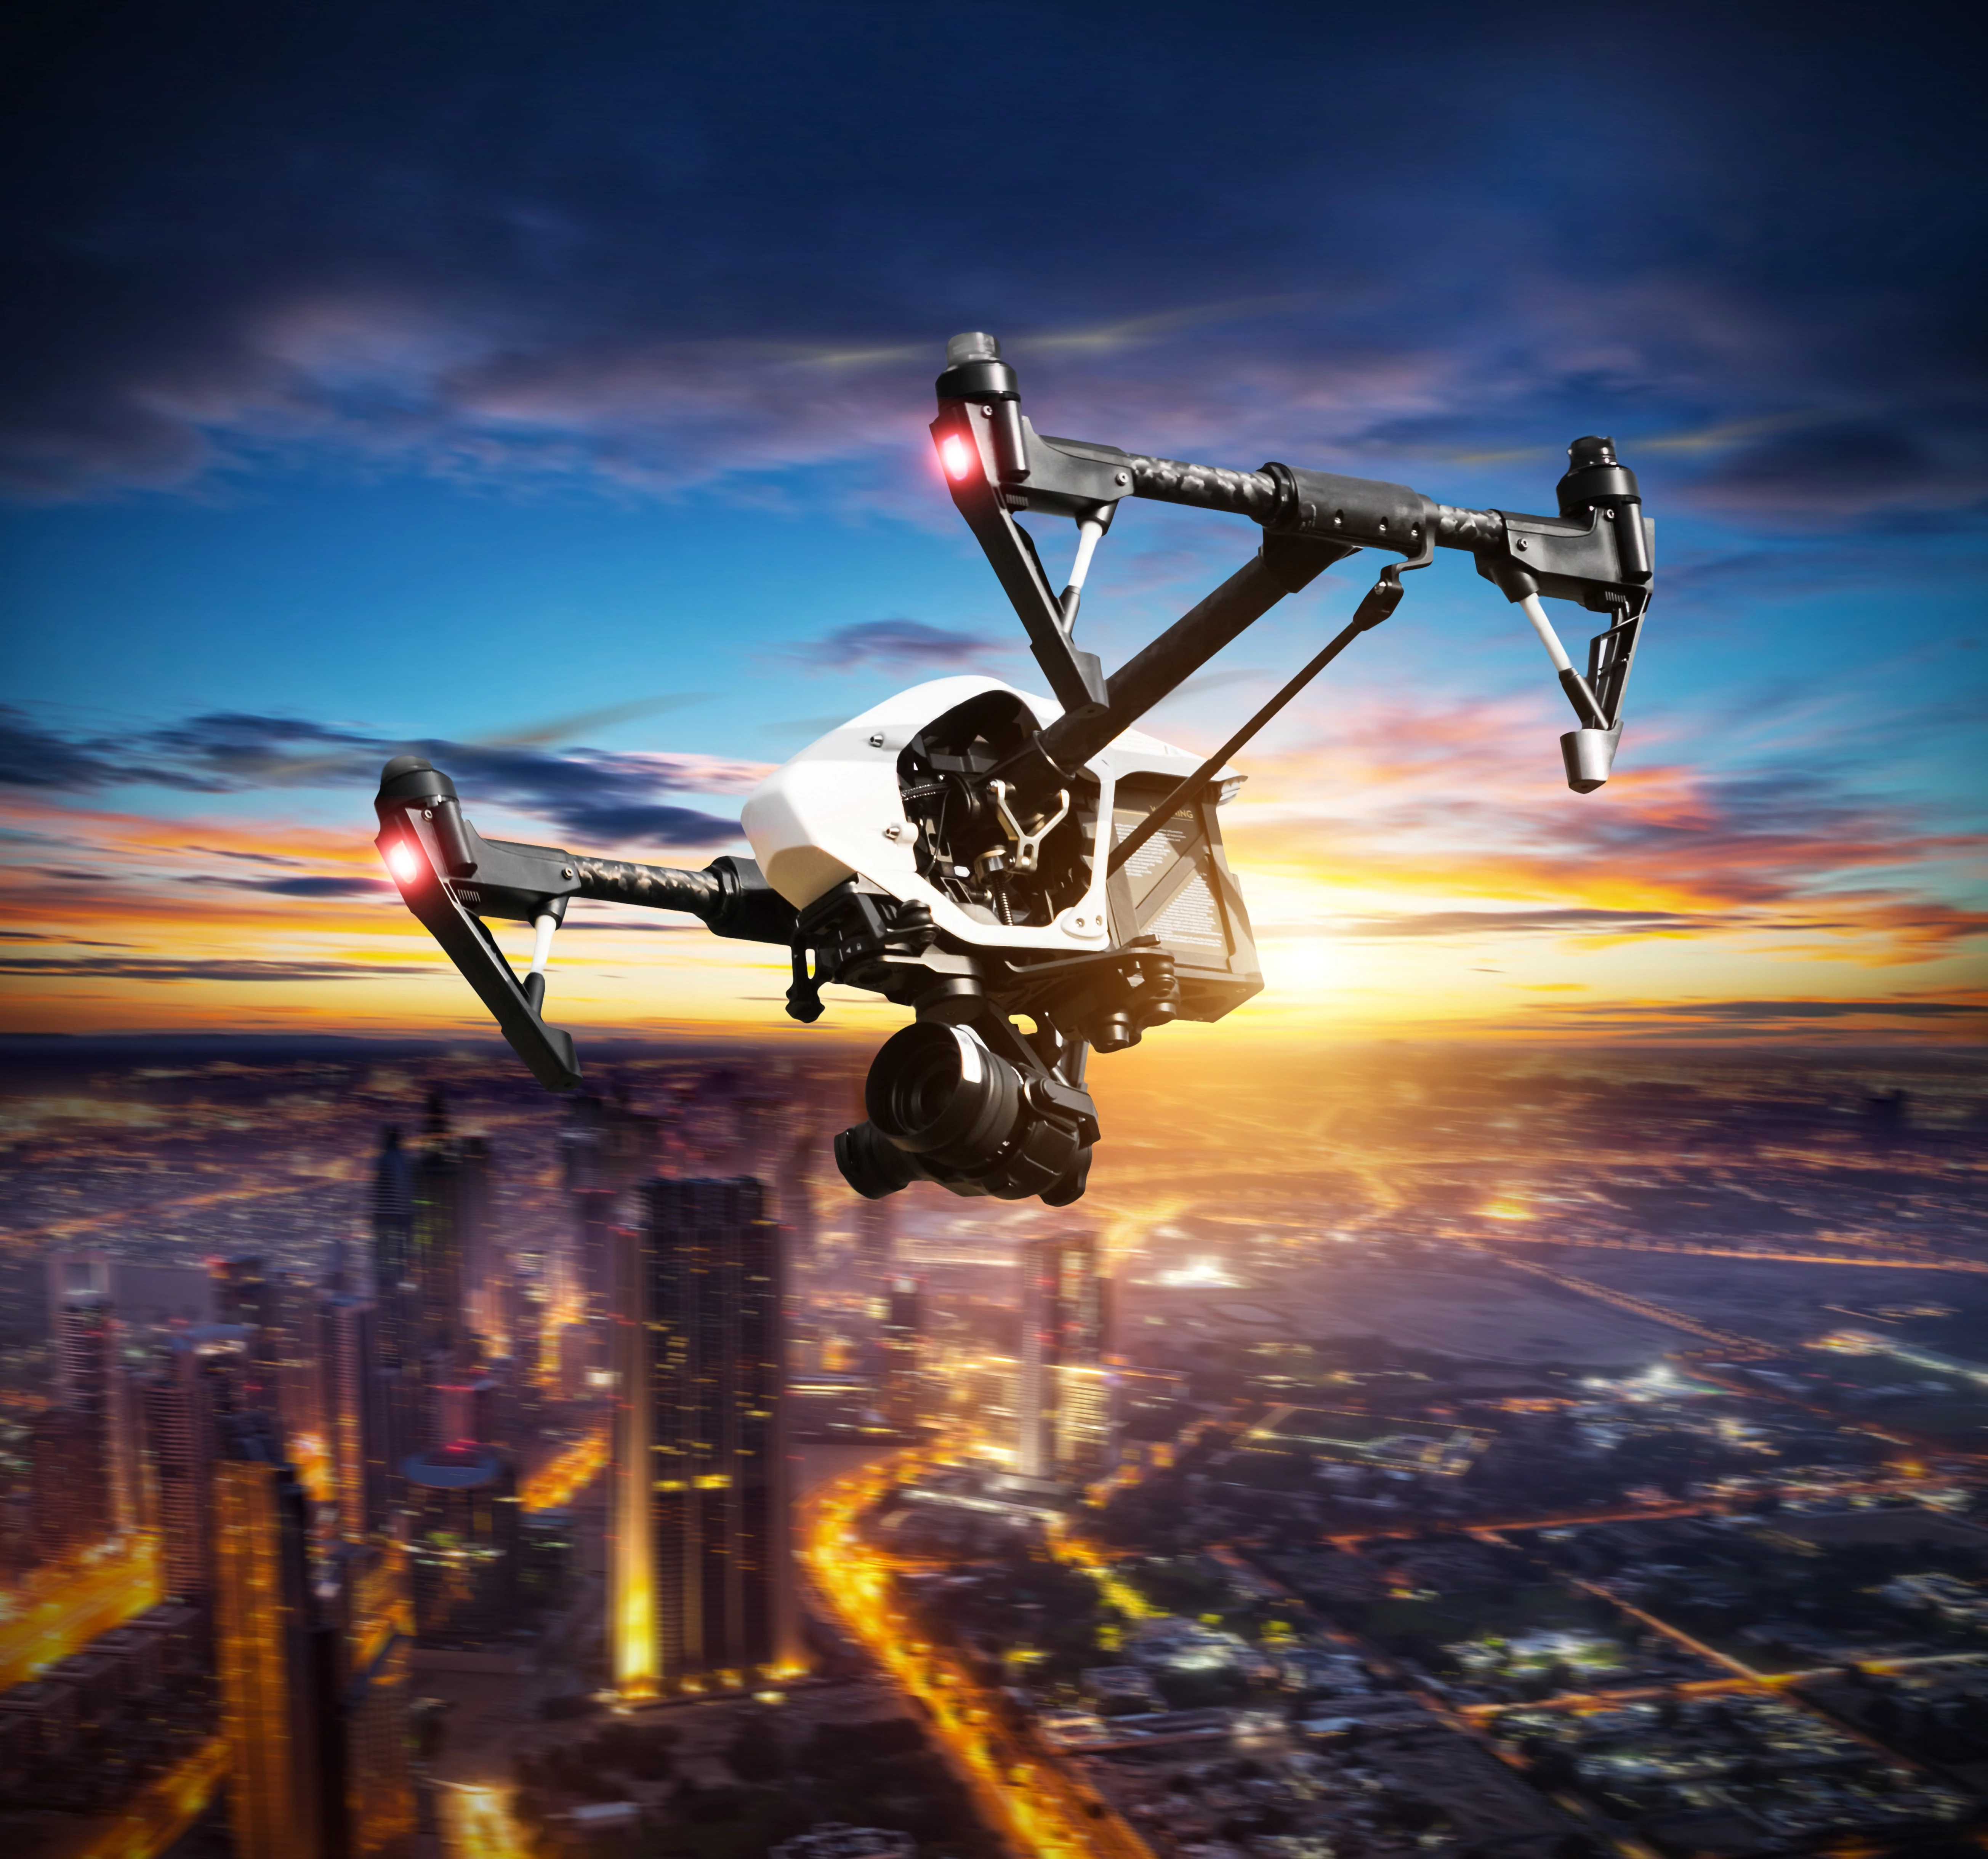 Dubai Property listings and Land Locations improved using drones